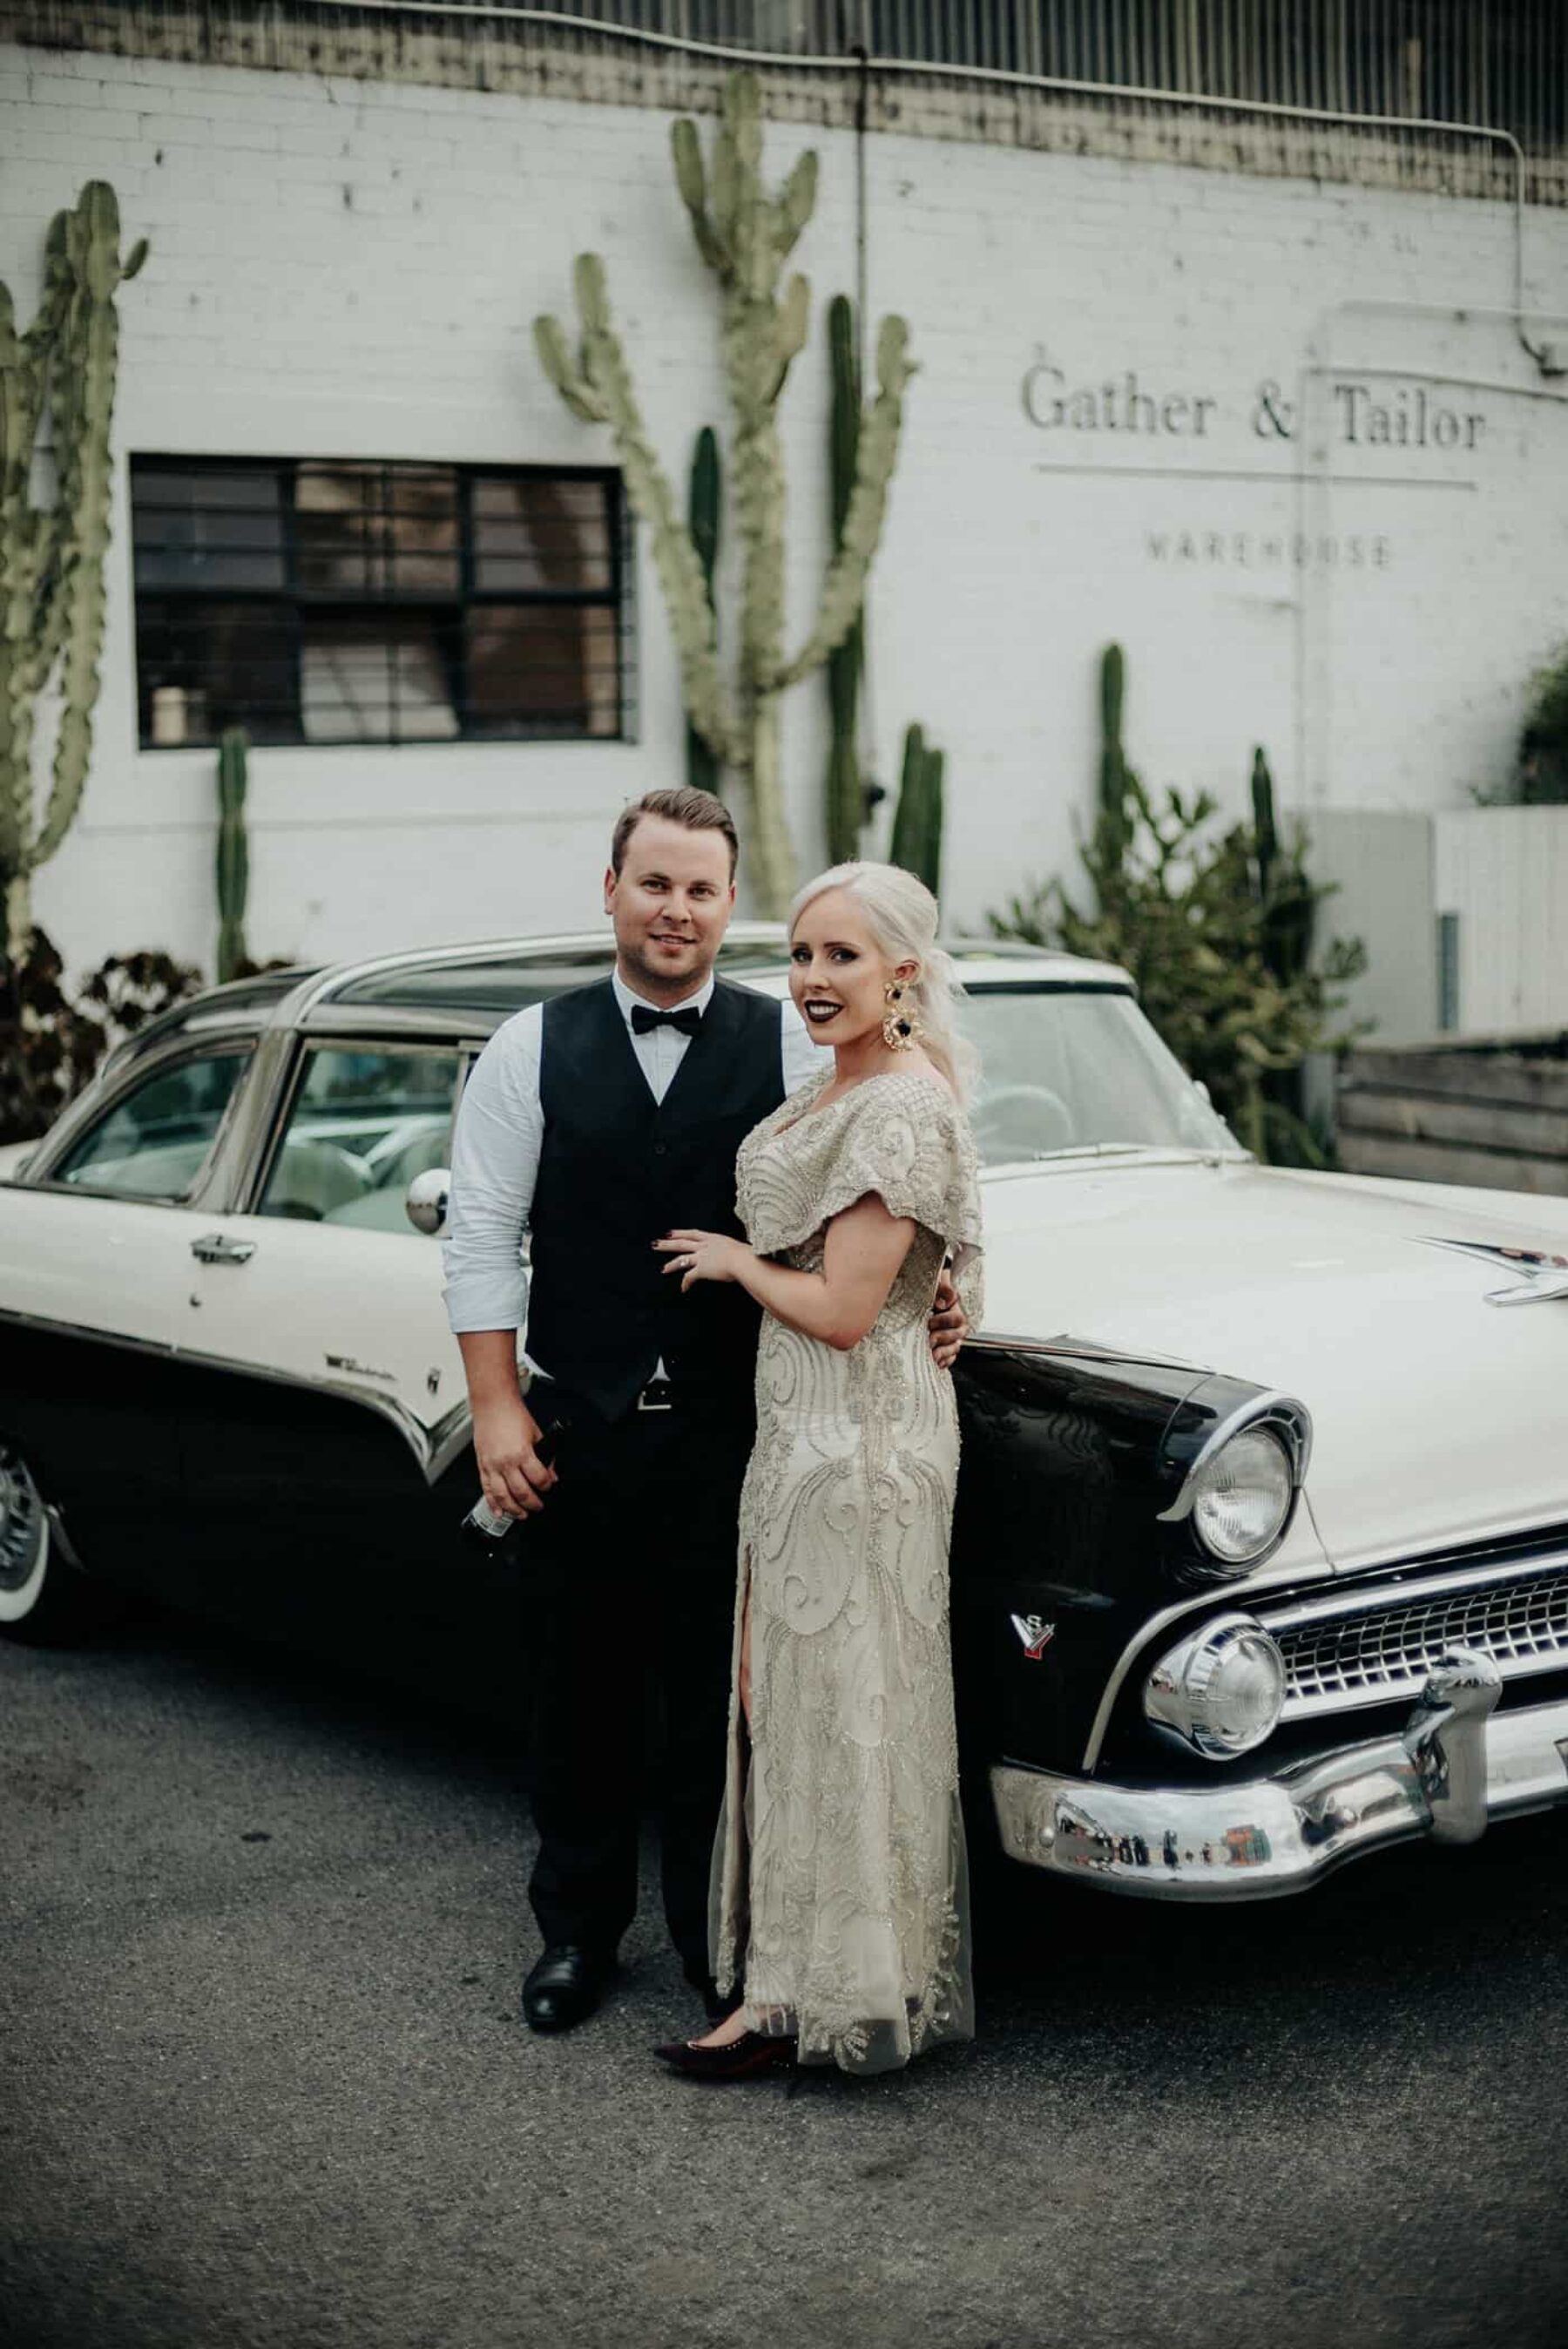 Melbourne warehouse wedding at Gather & Tailor